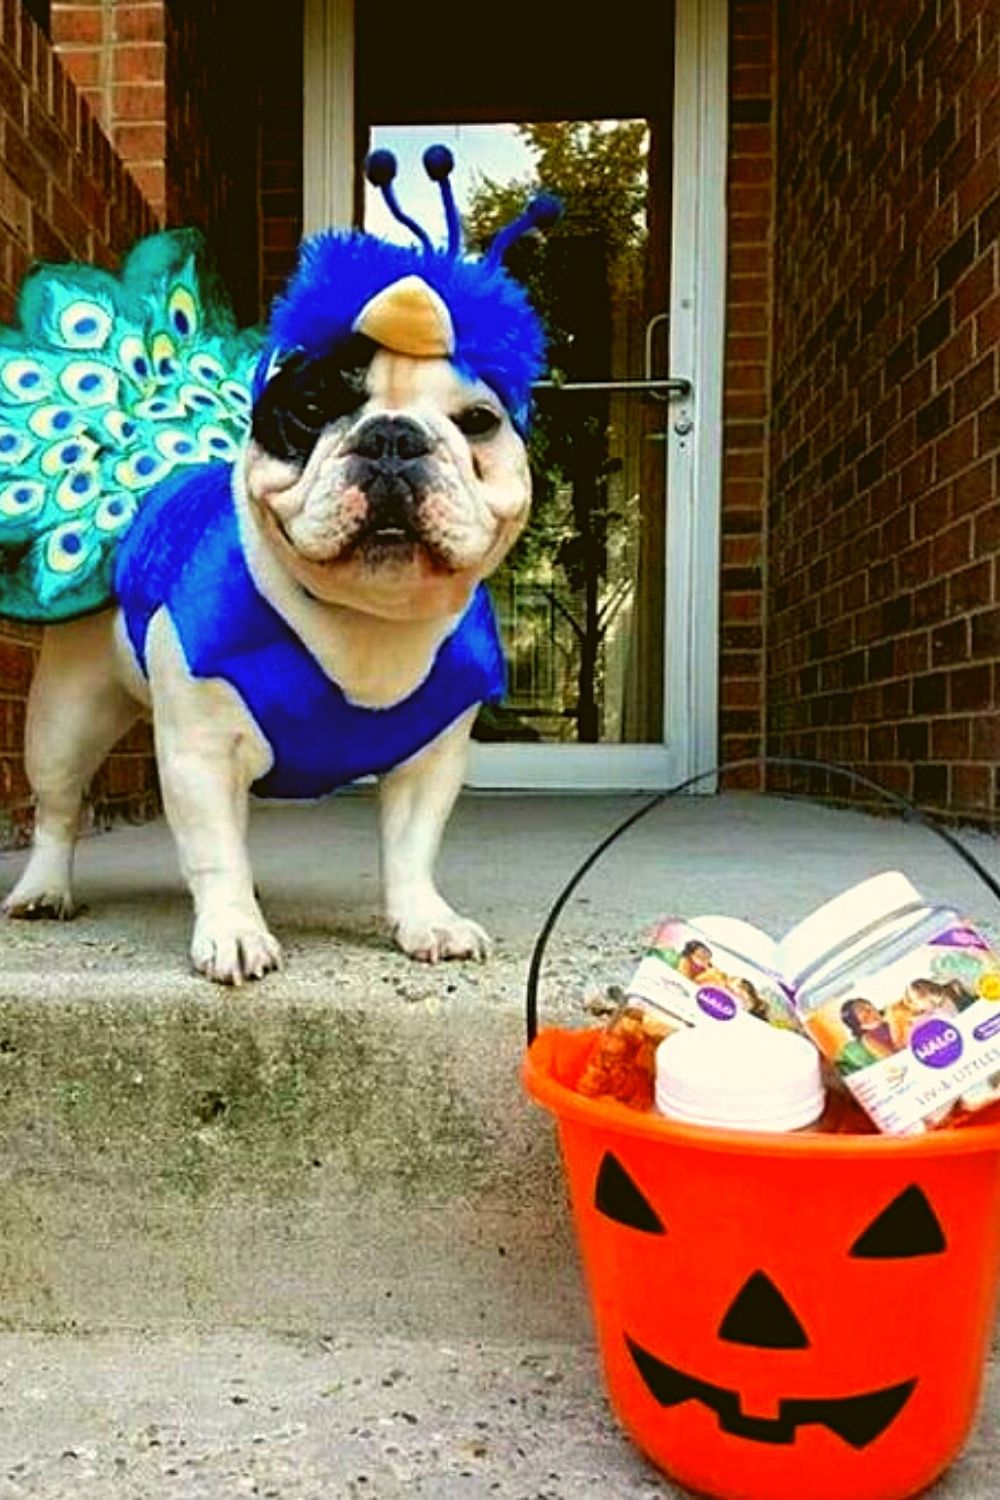 Peacock costume for dog.